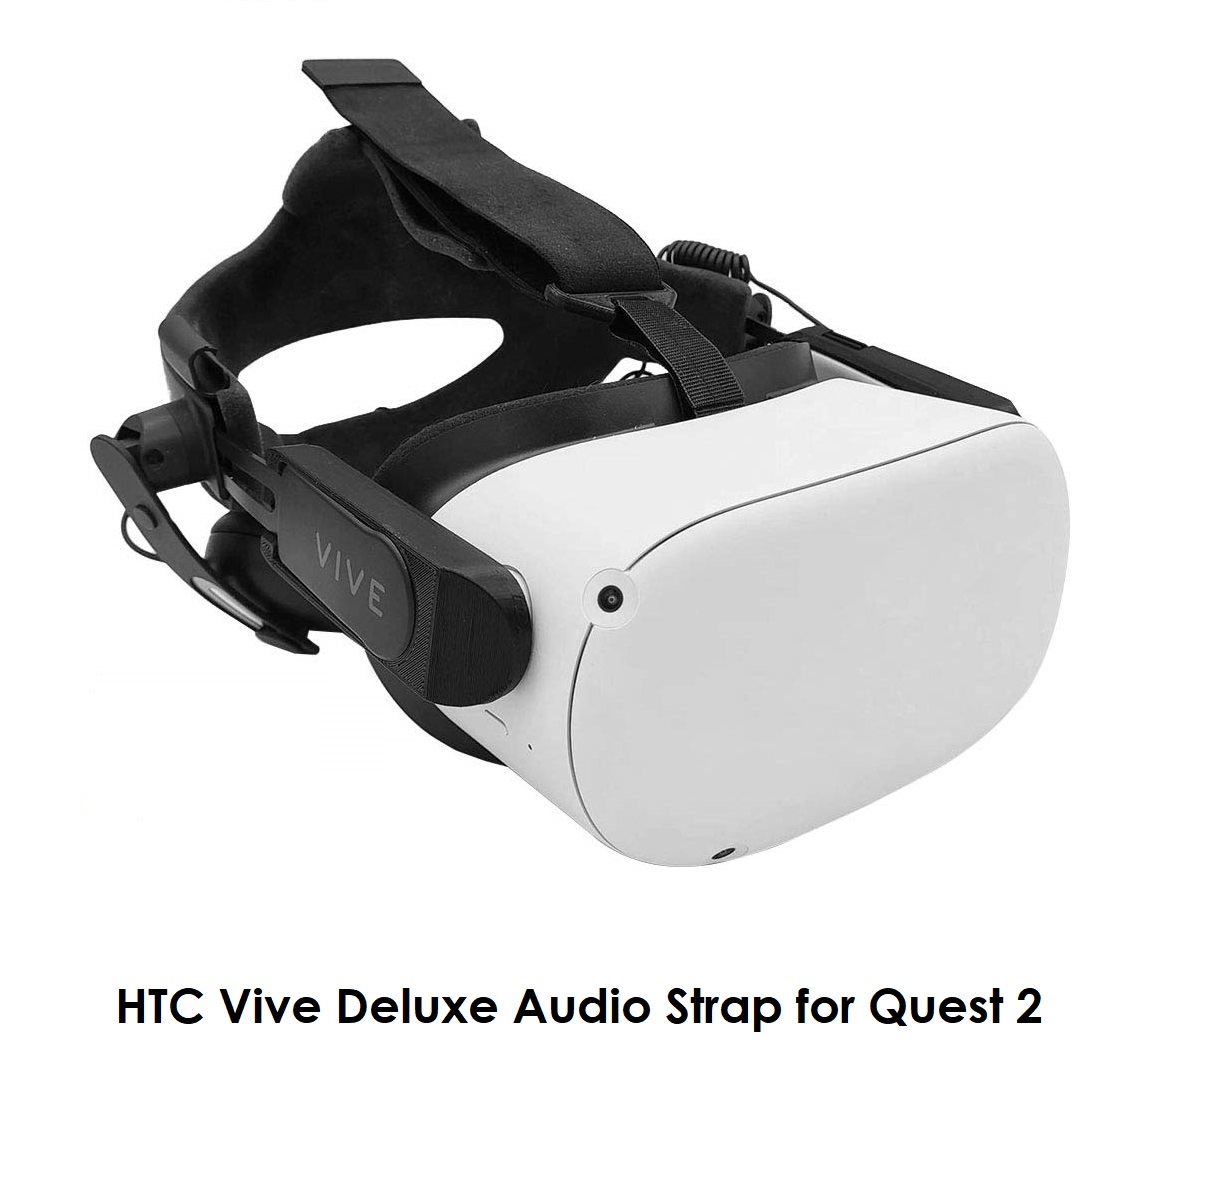 Oculus Quest 2 Accessories — Deluxe Audio Strap from HTC Vive